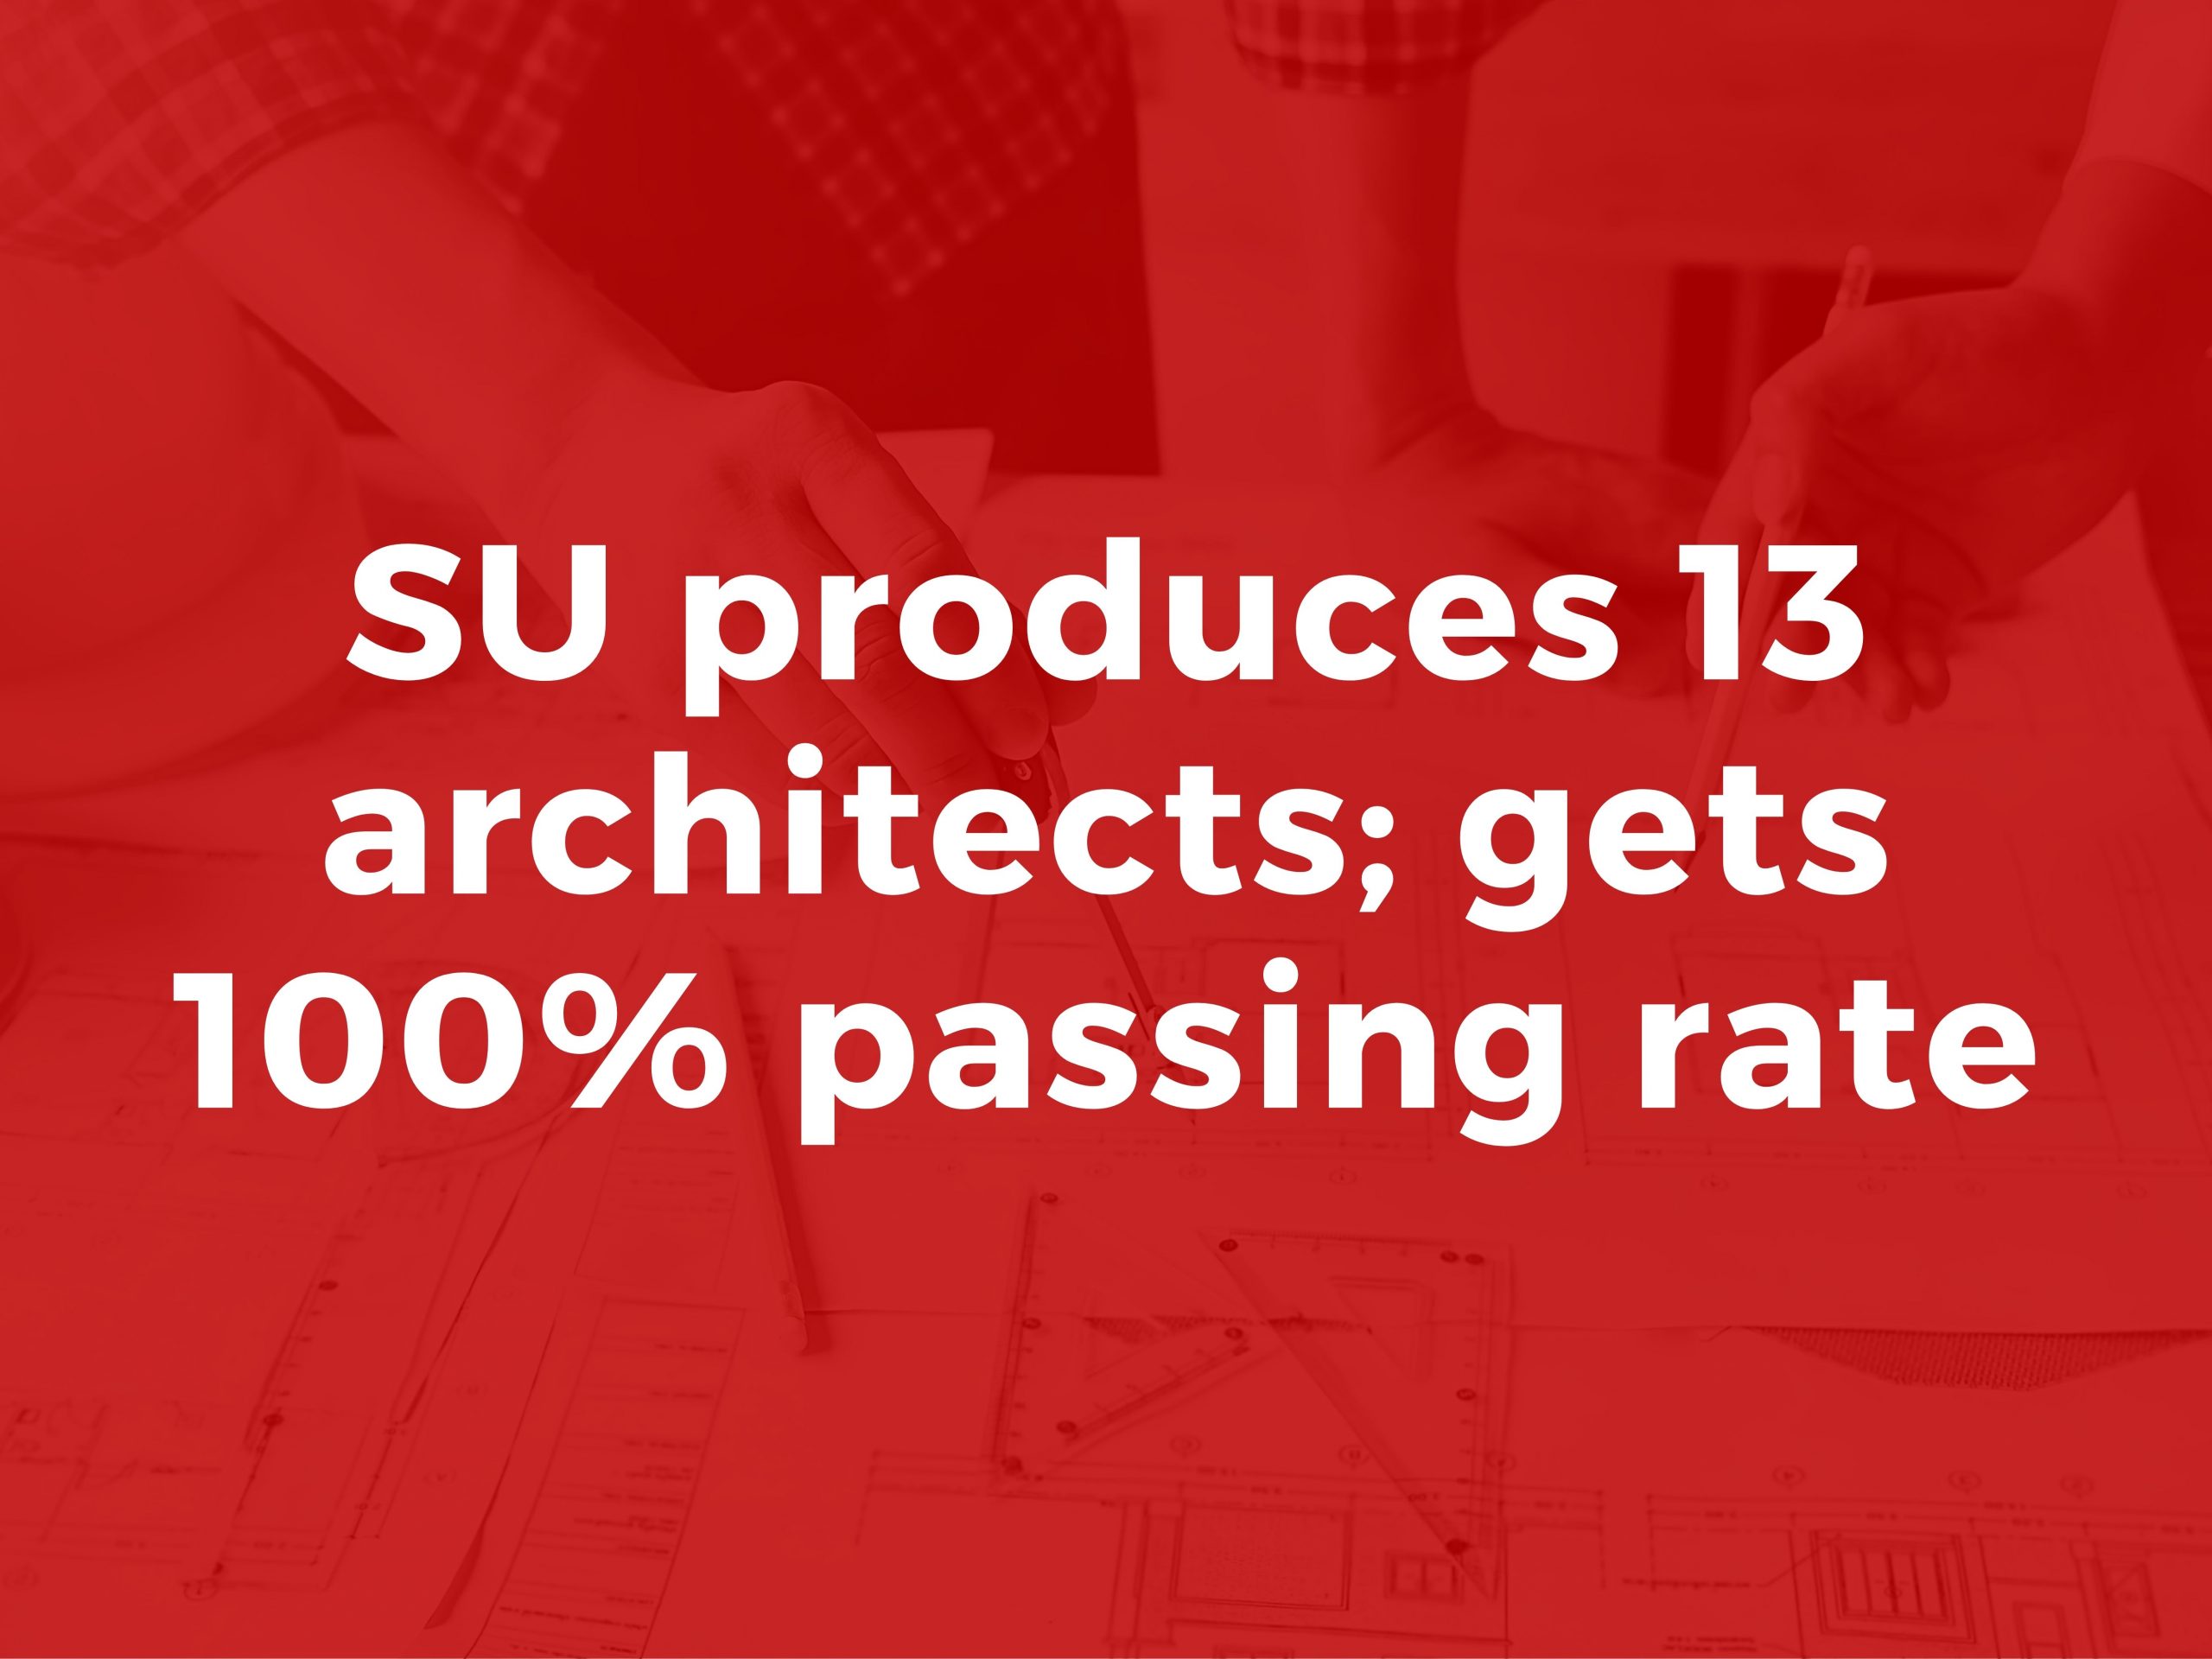 SU produces 13 architects; gets 100% passing rate